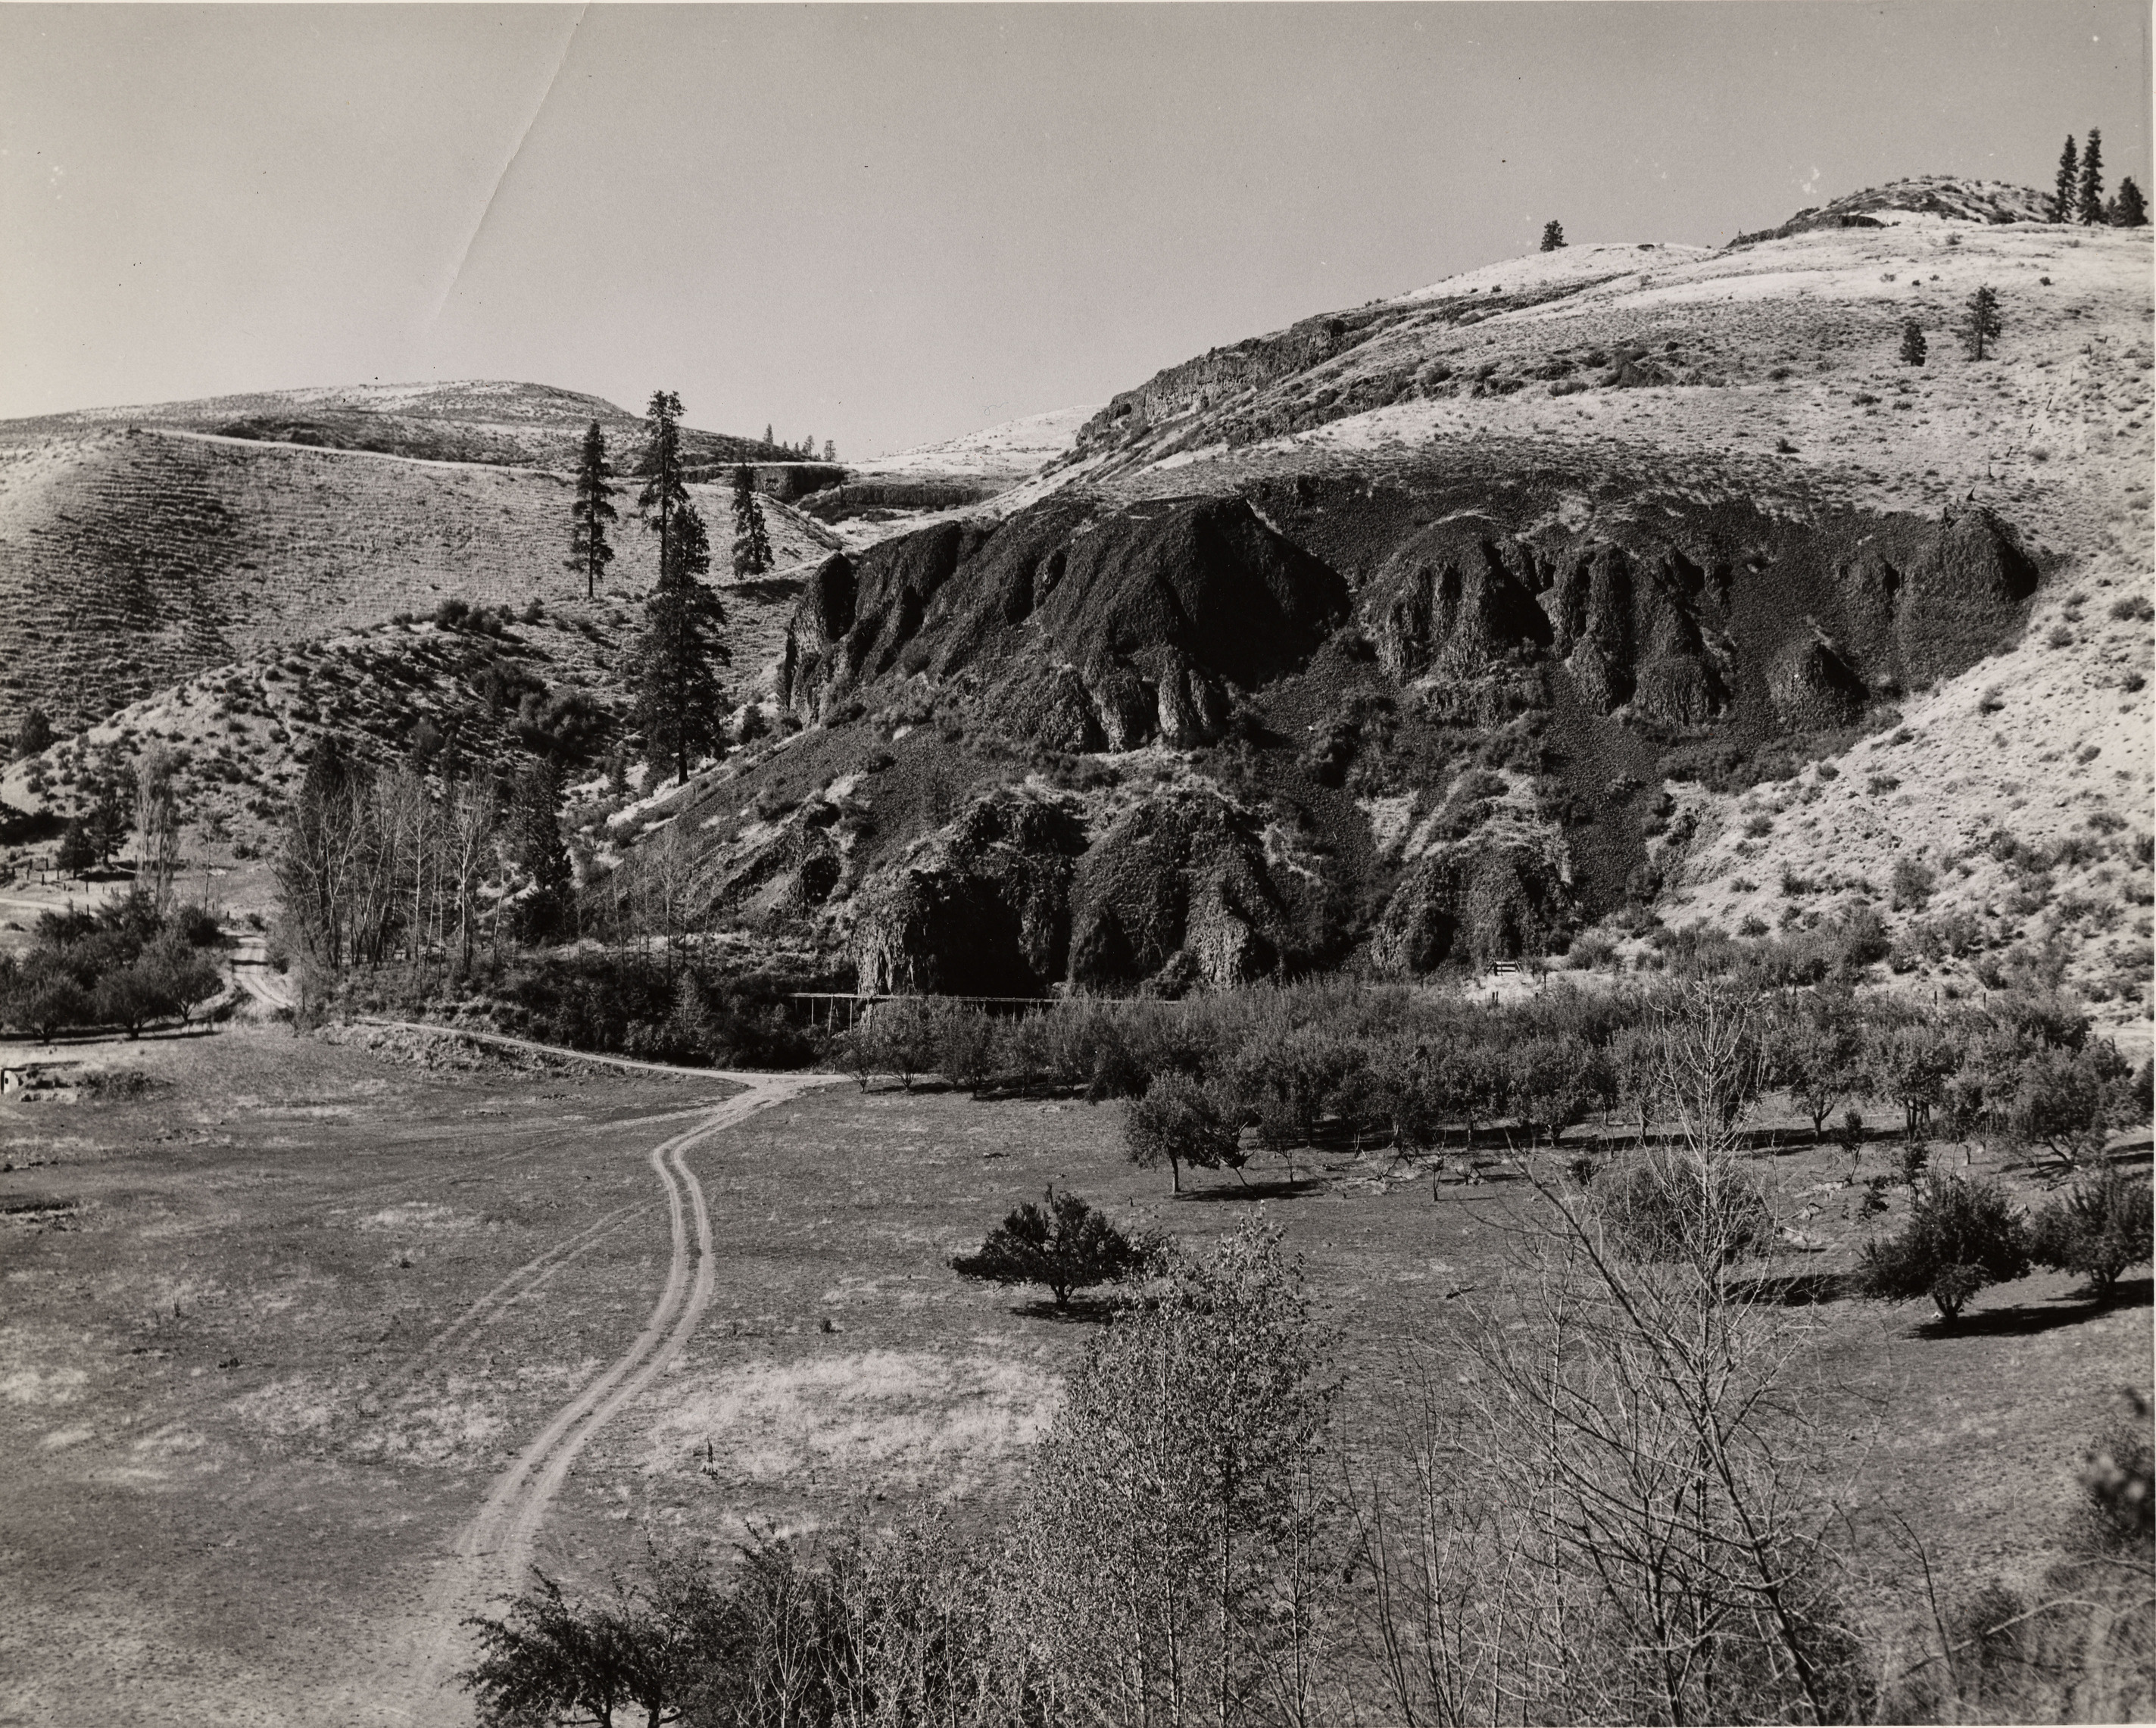 Black and white photograph of a large clearing with a dirt road across it with steep, dark cliffs in the background